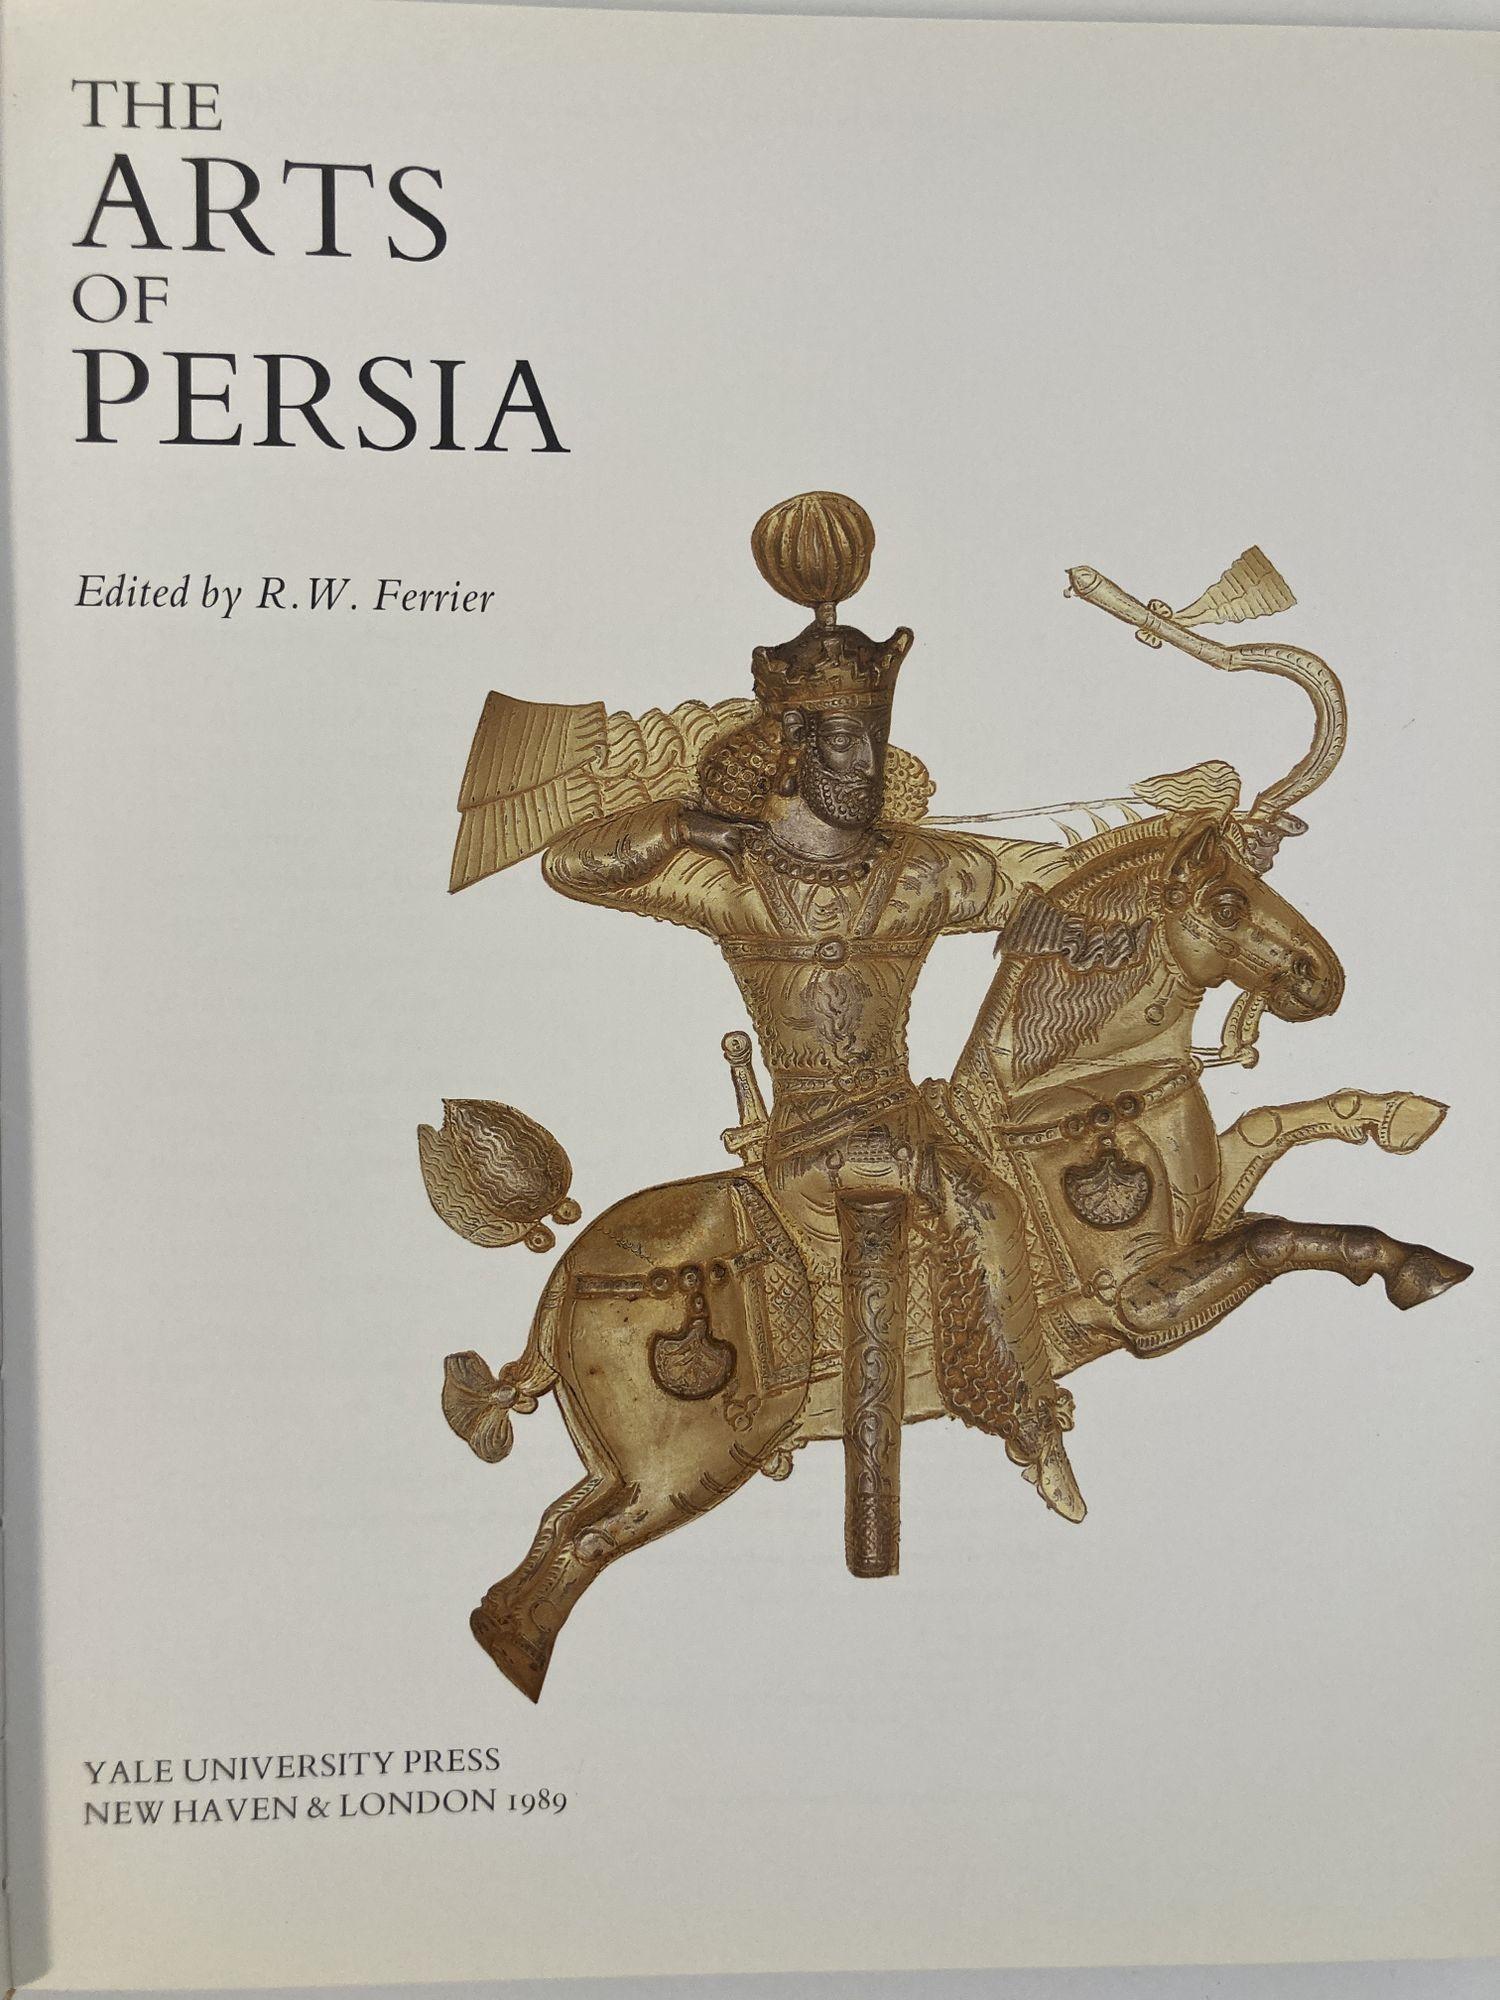 Paper The Arts of Persia Ronald W. Ferrier Hardcover Book 1st Ed. 1989 For Sale